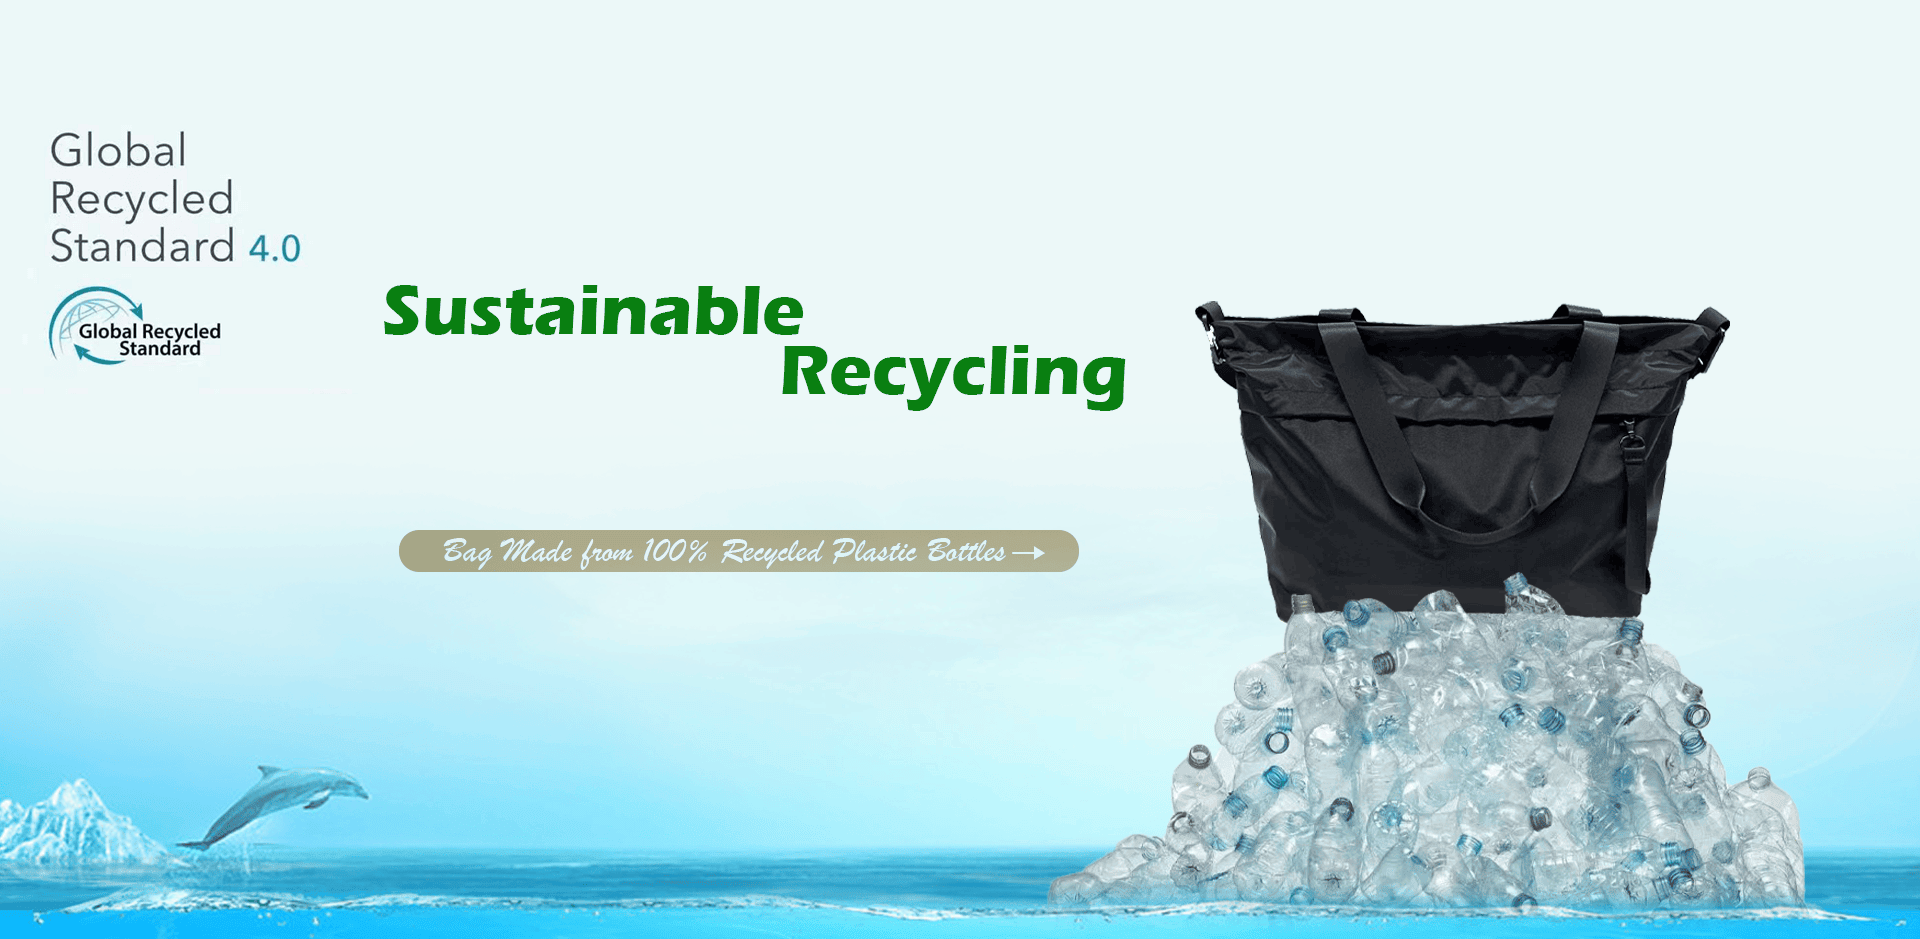 Sustainabl Recycling